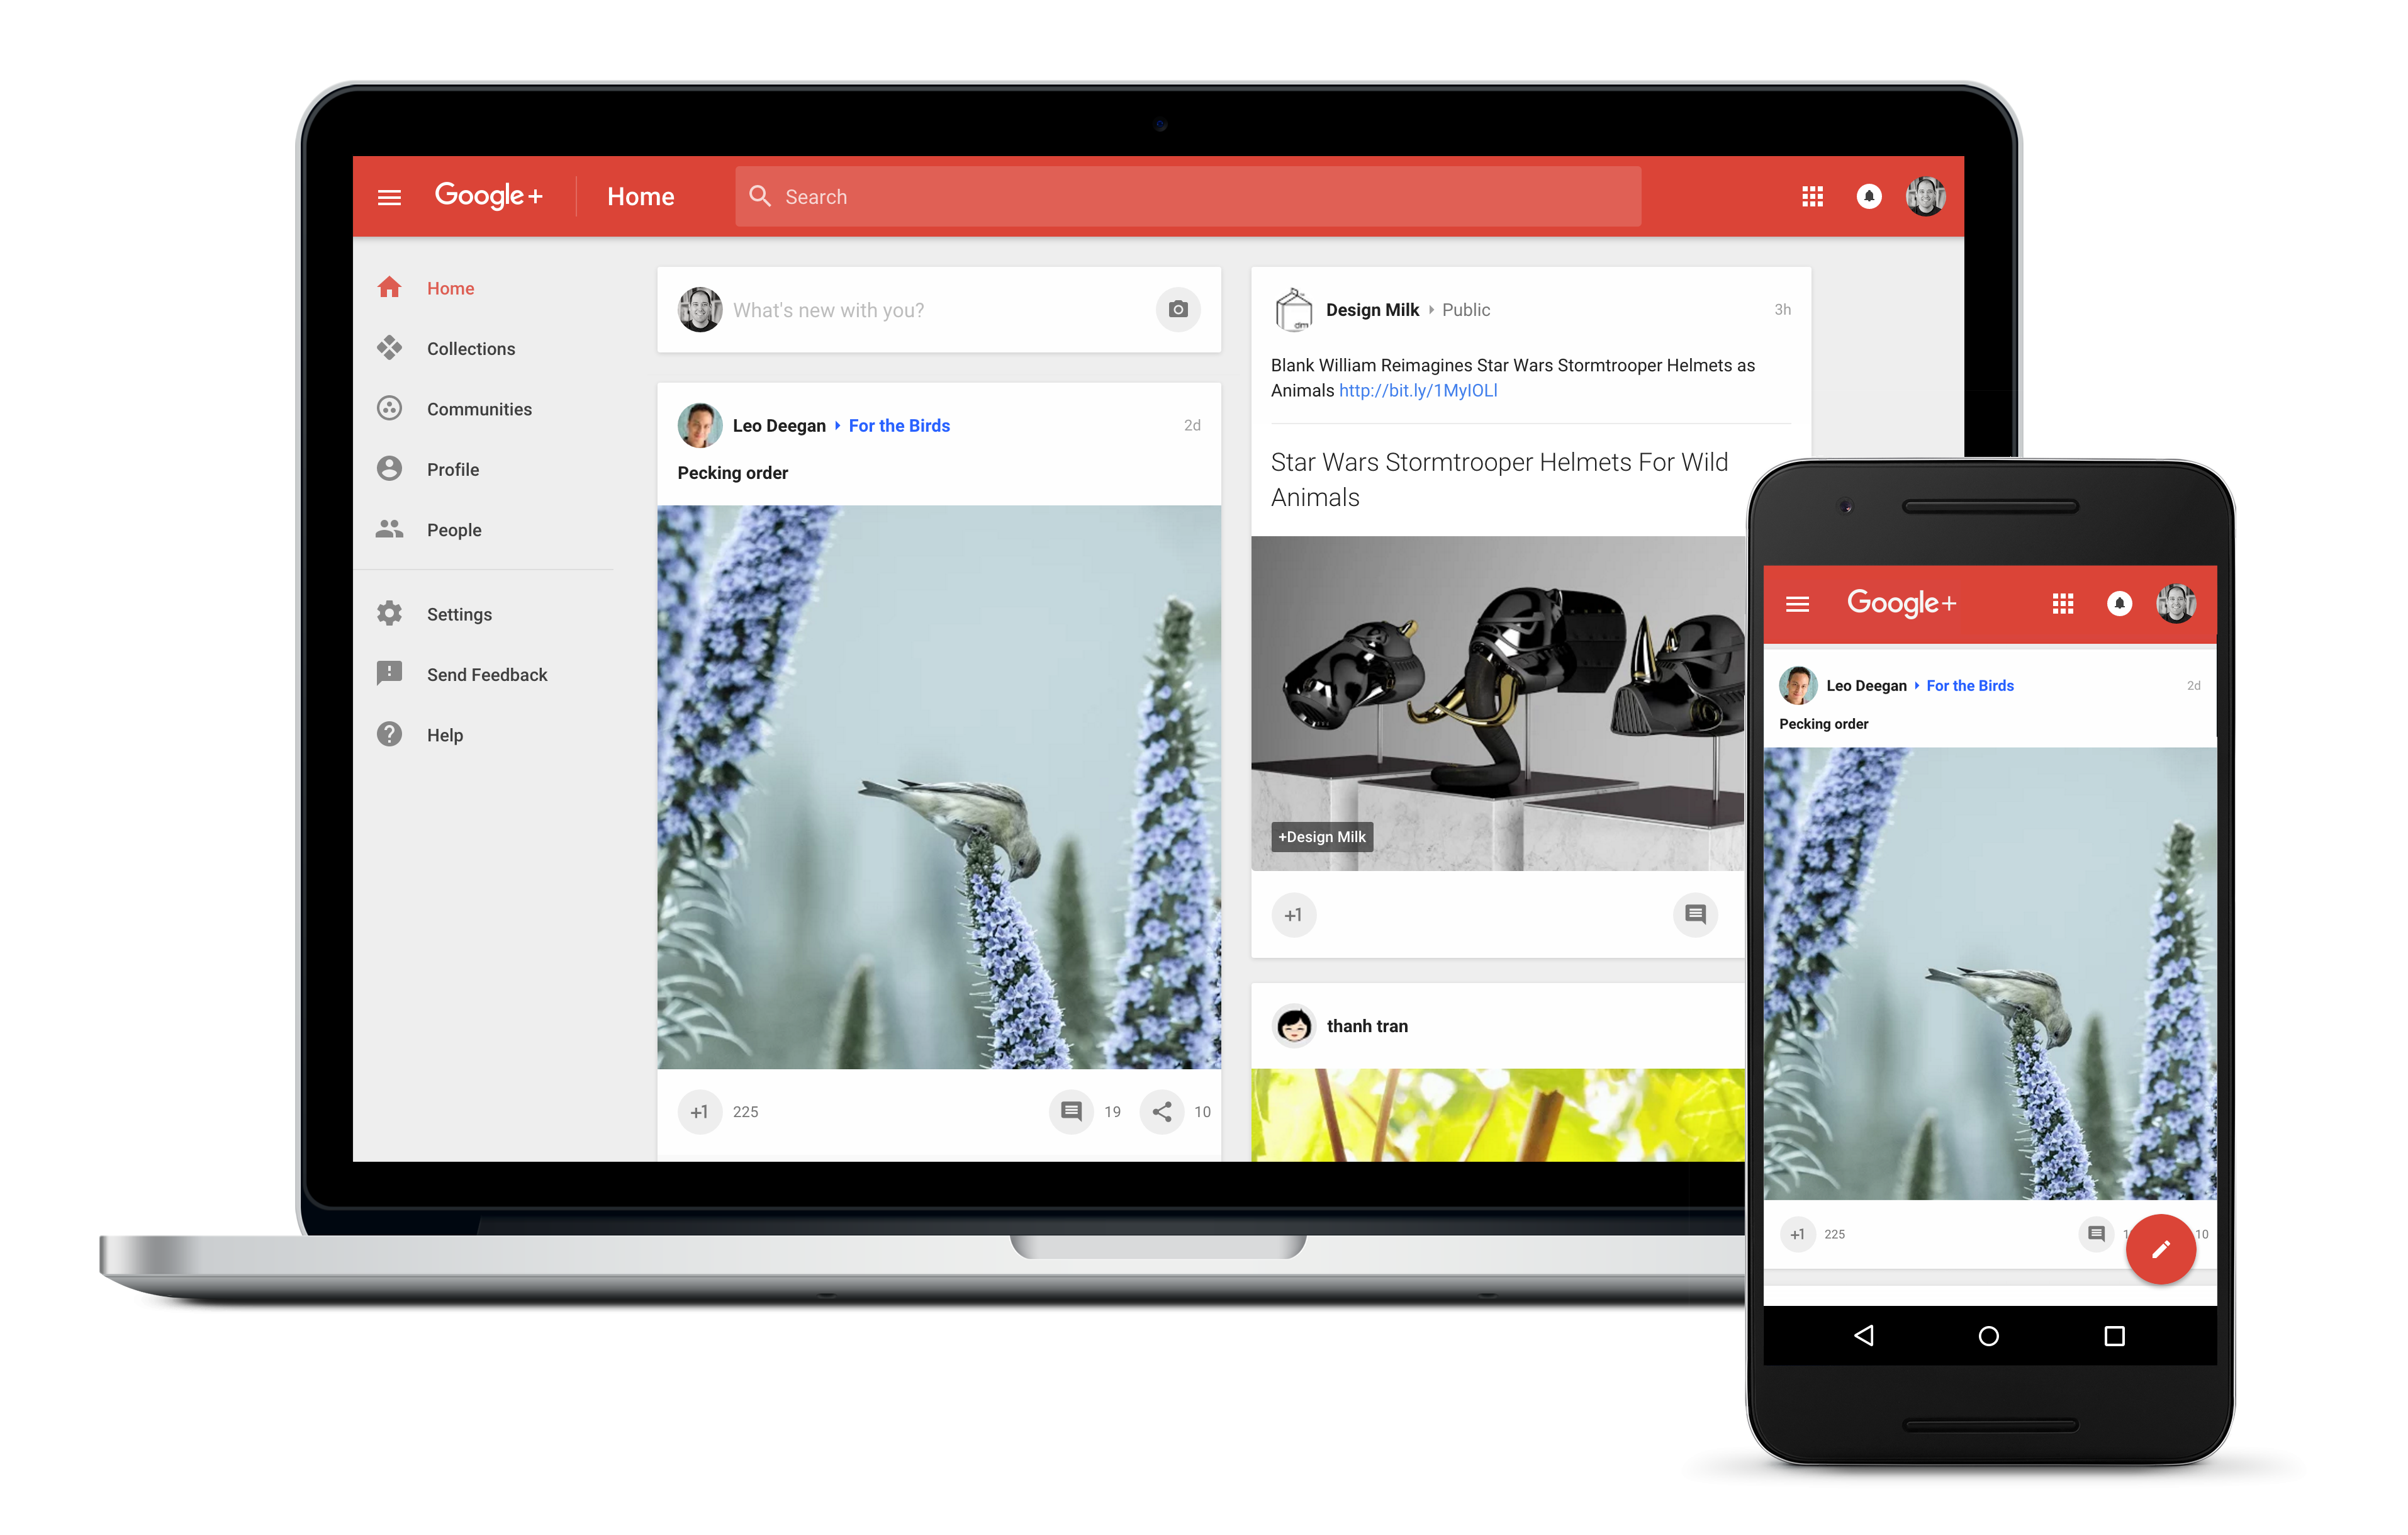 Google introduces the new Google+ with a focus on Communities and Collections